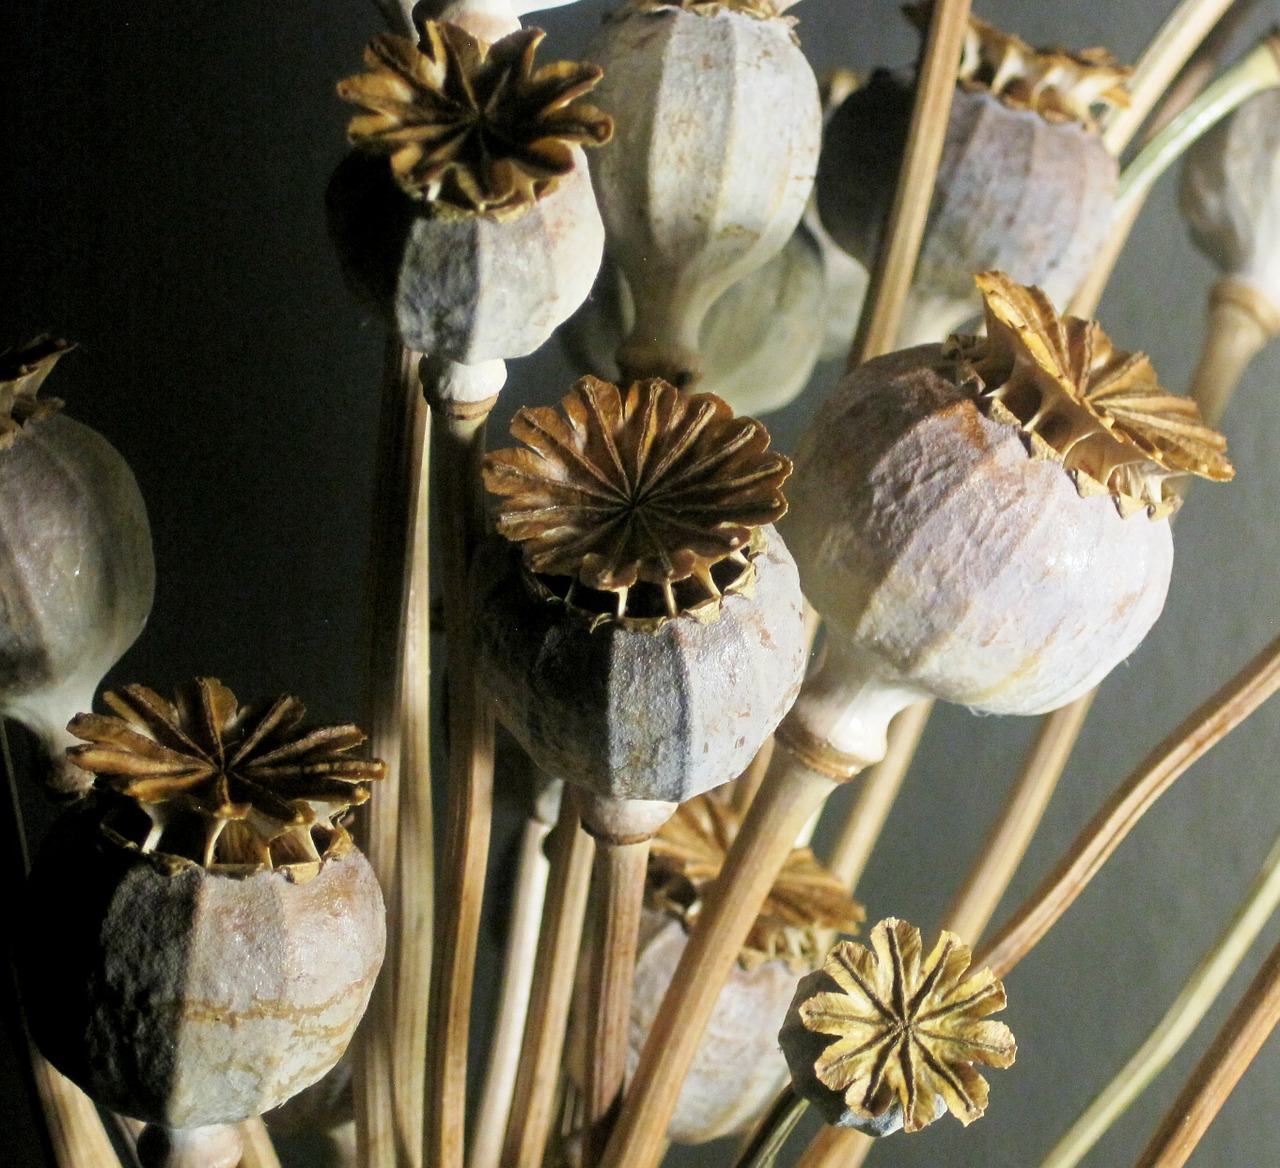 Dried Poppy Pods And Stems for decoration, wreaths, craft | Pine cones for  sale, Poppy pods, Pine cone crafts